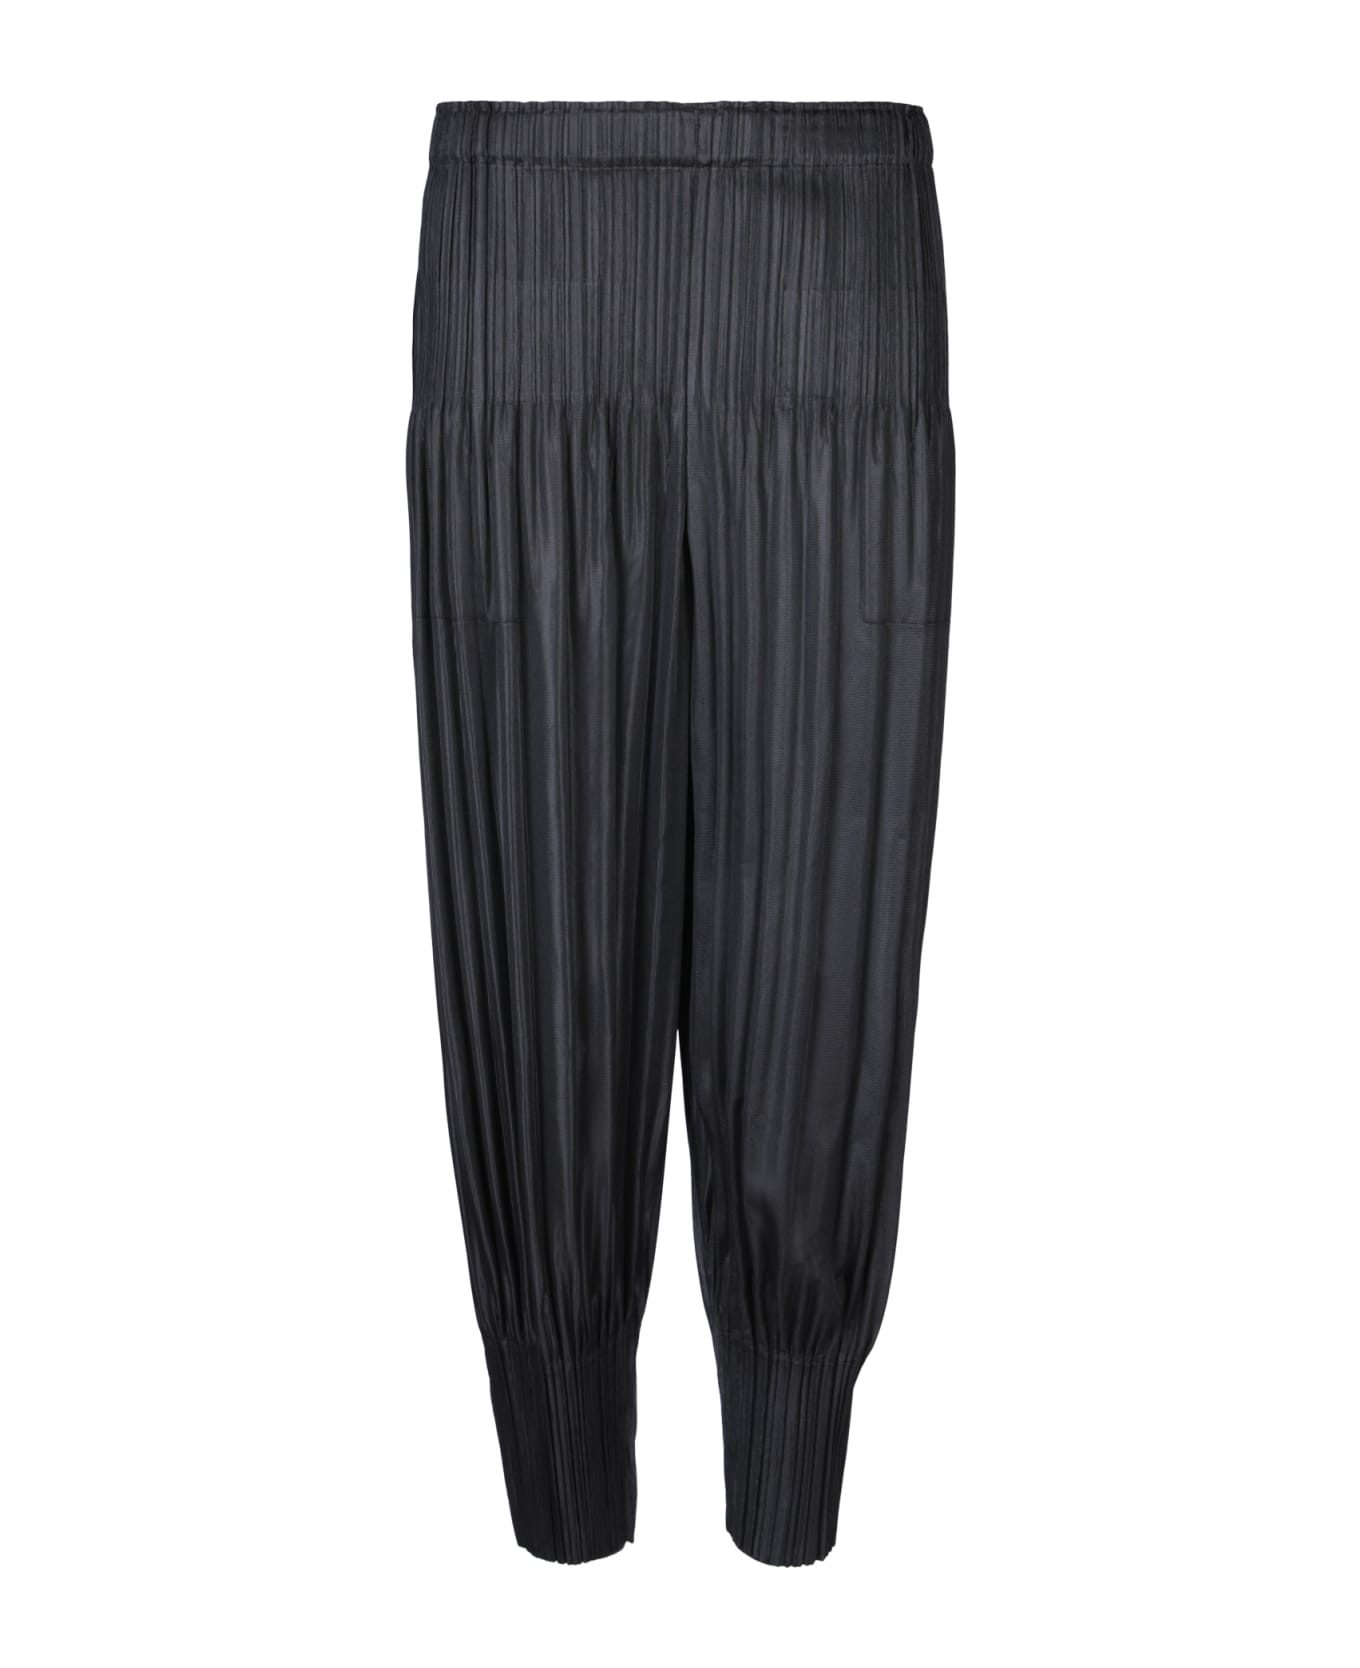 Issey Miyake Fluffy Pleats Please Black Trousers - Black ボトムス